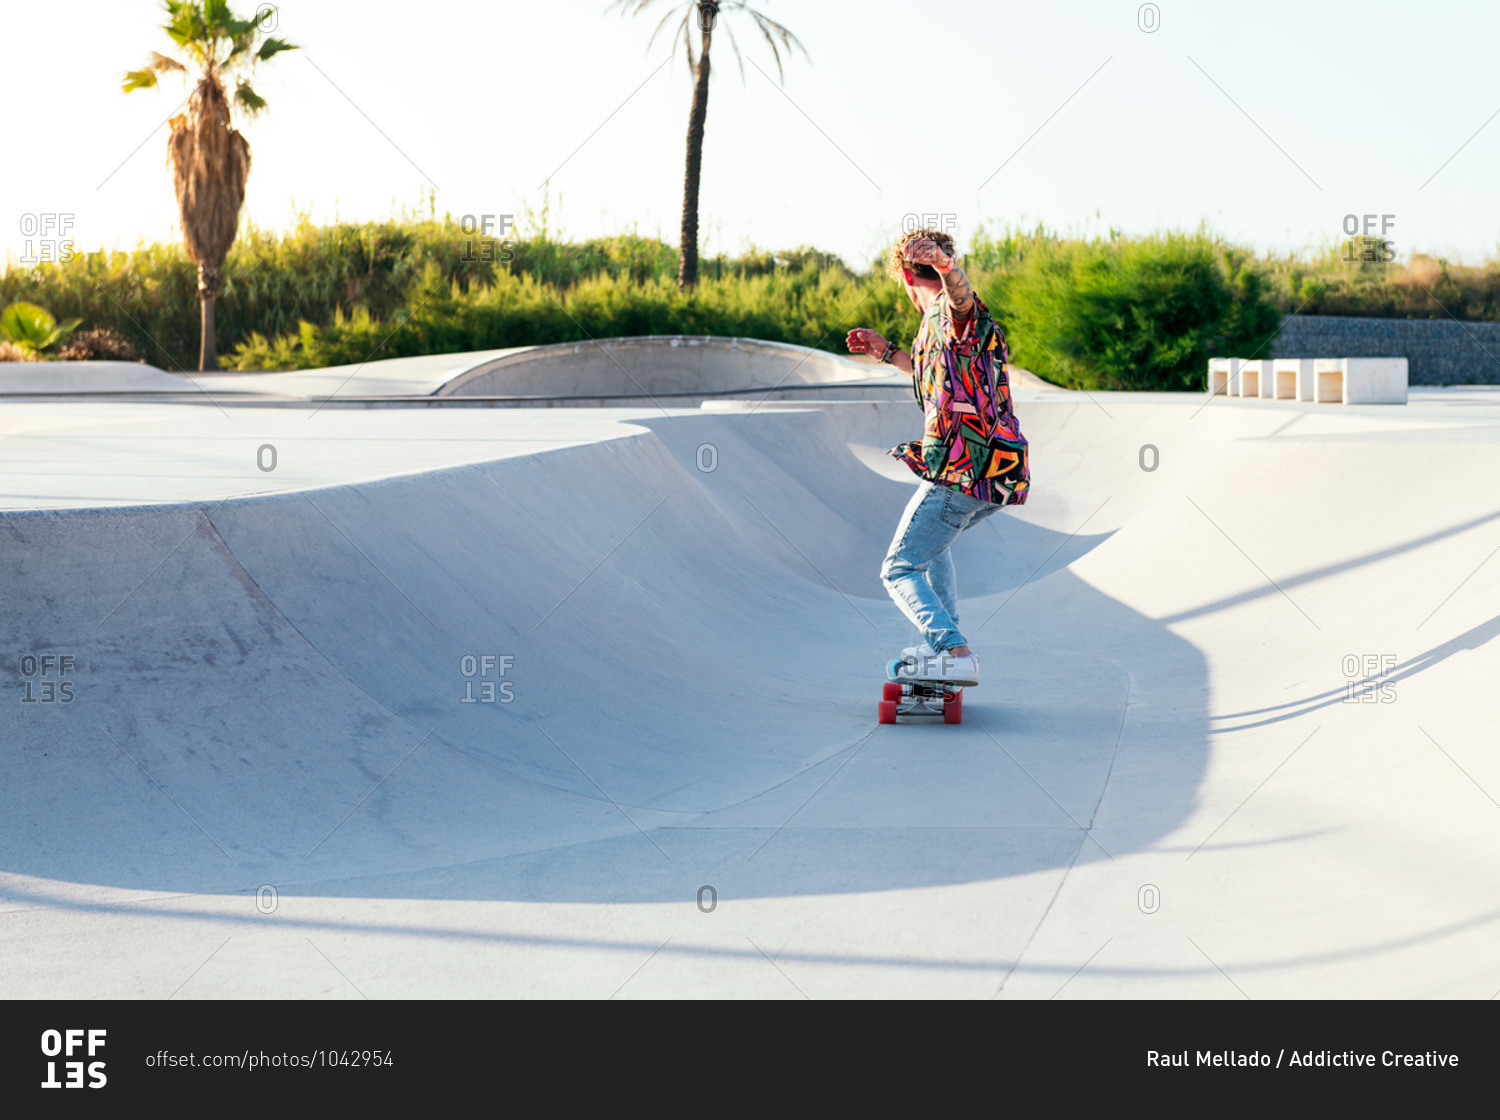 Back view of anonymous funky young male skateboarder in trendy colorful shirt and jeans performing trick on concrete ramp while practicing skills in skatepark